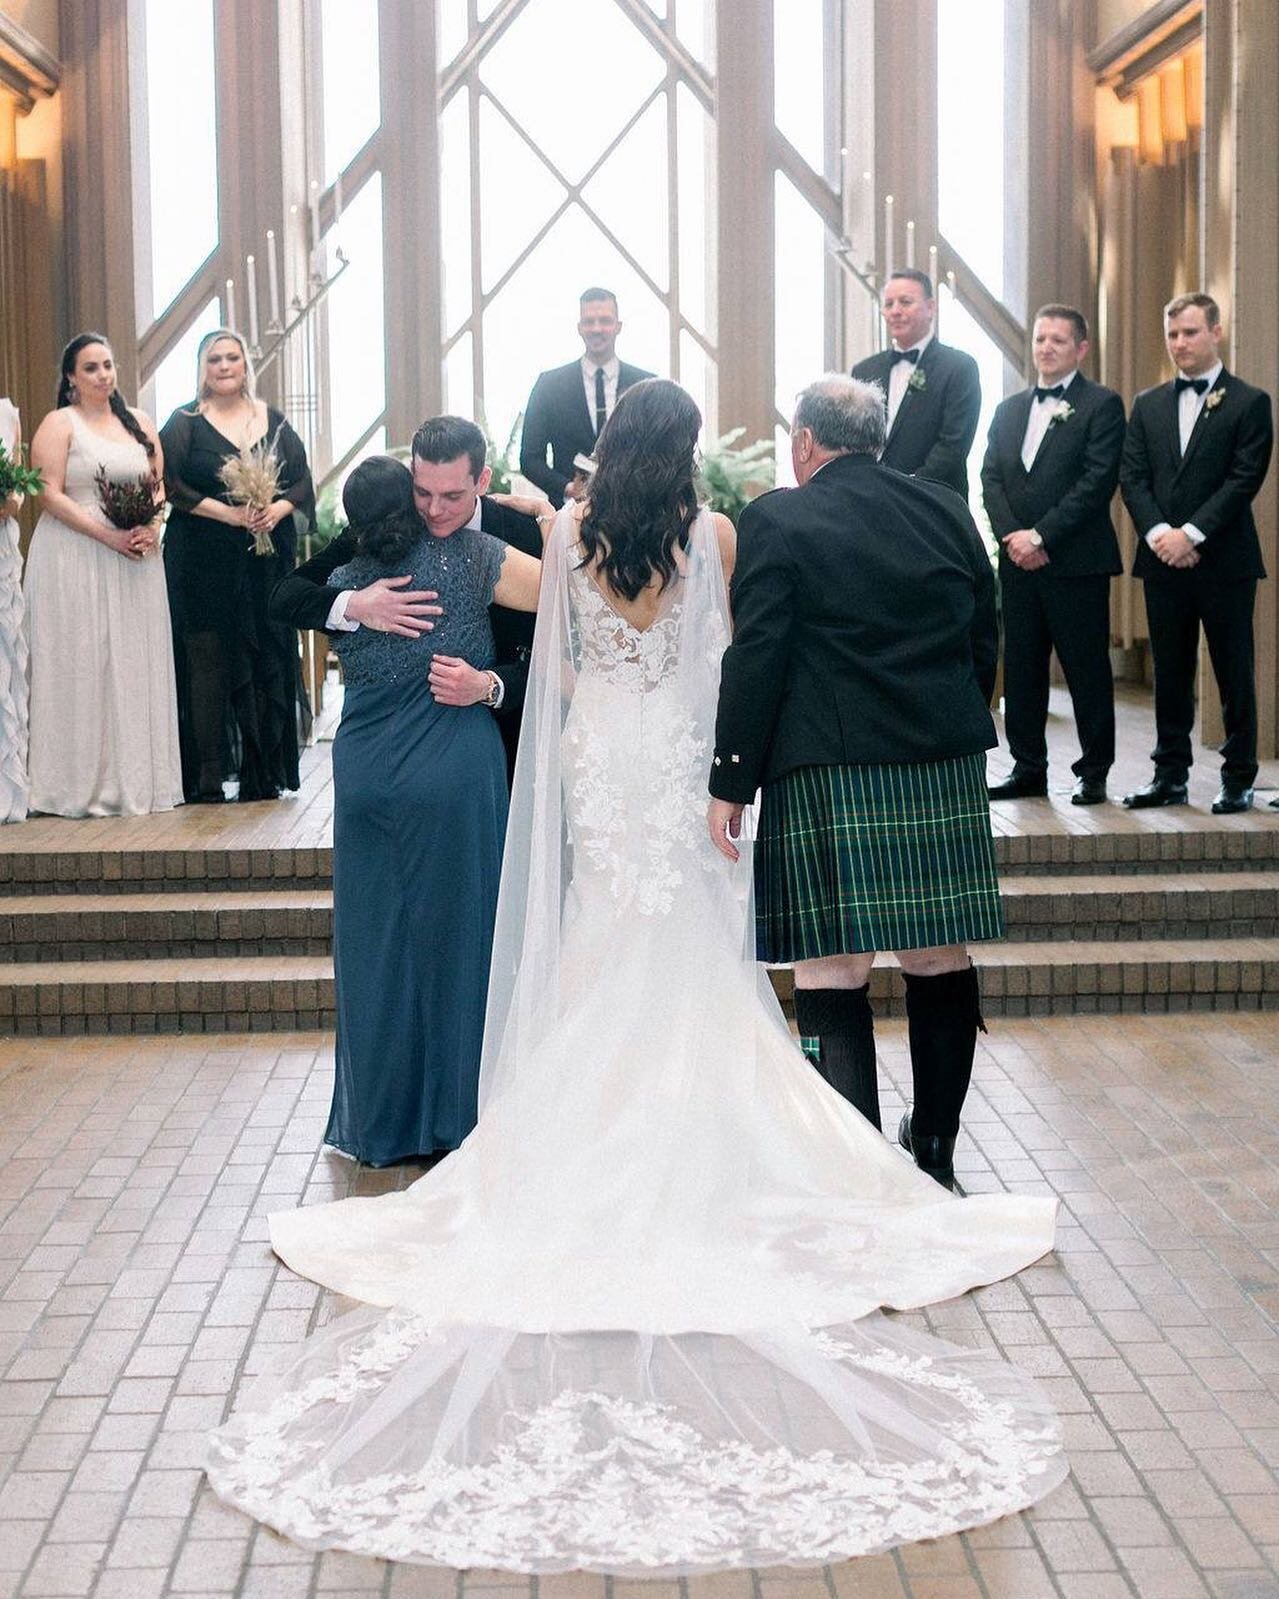 There are no words to describe the heartfelt emotions throughout this wedding ceremony. Nara + Travis are a dreamy couple and their big day was what dreams are made of!

officiant: Mathew DeBlanc
venue: @martyleonardchapel 
photo: @charlastorey 
flor